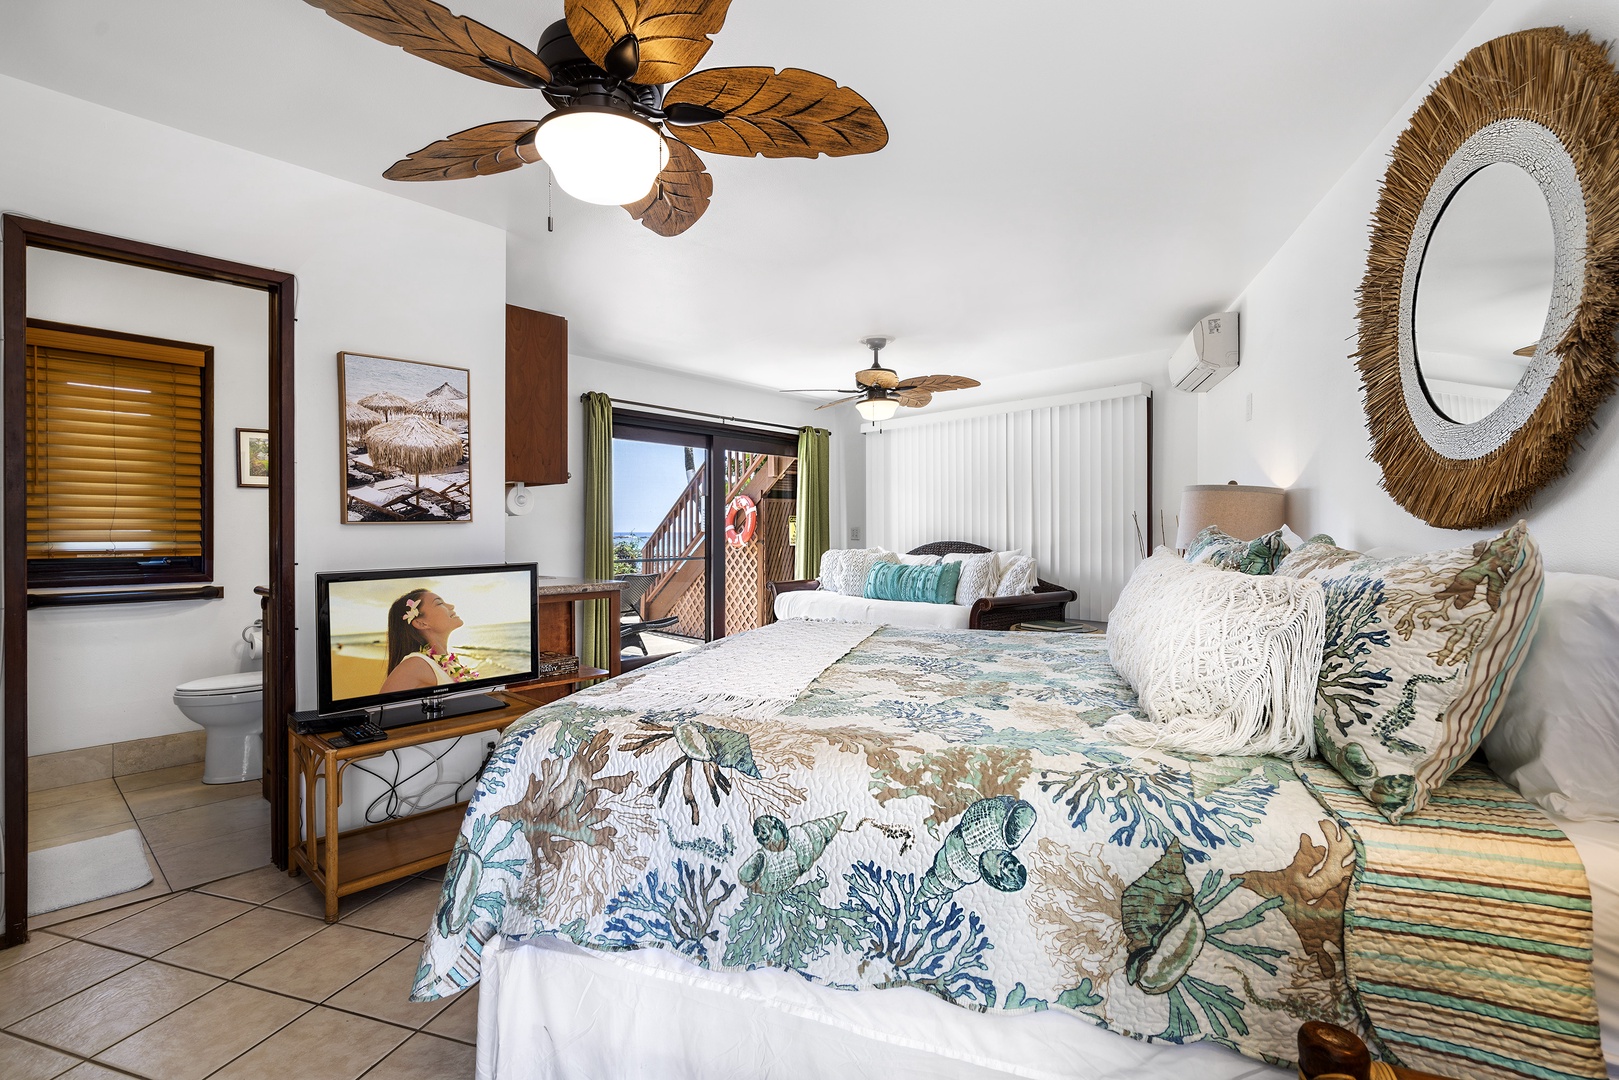 Kailua Kona Vacation Rentals, Kona's Shangri La - First floor equipped with King bed and twin day bed